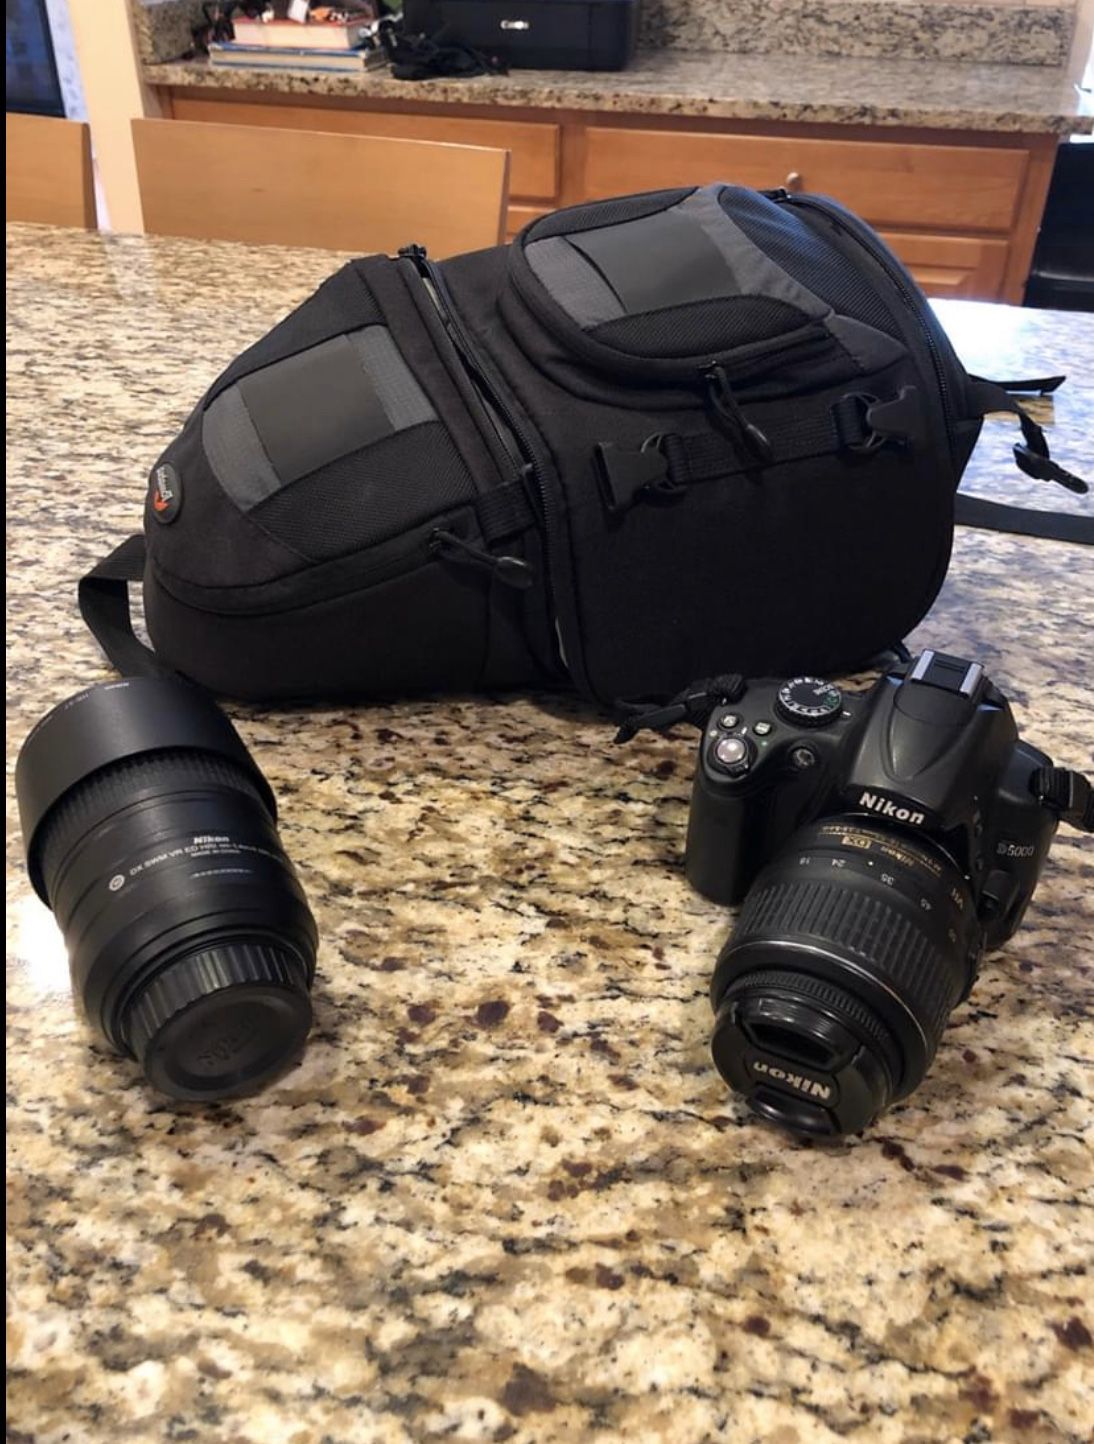 Nikon D5000 with 2 lenses and backpack